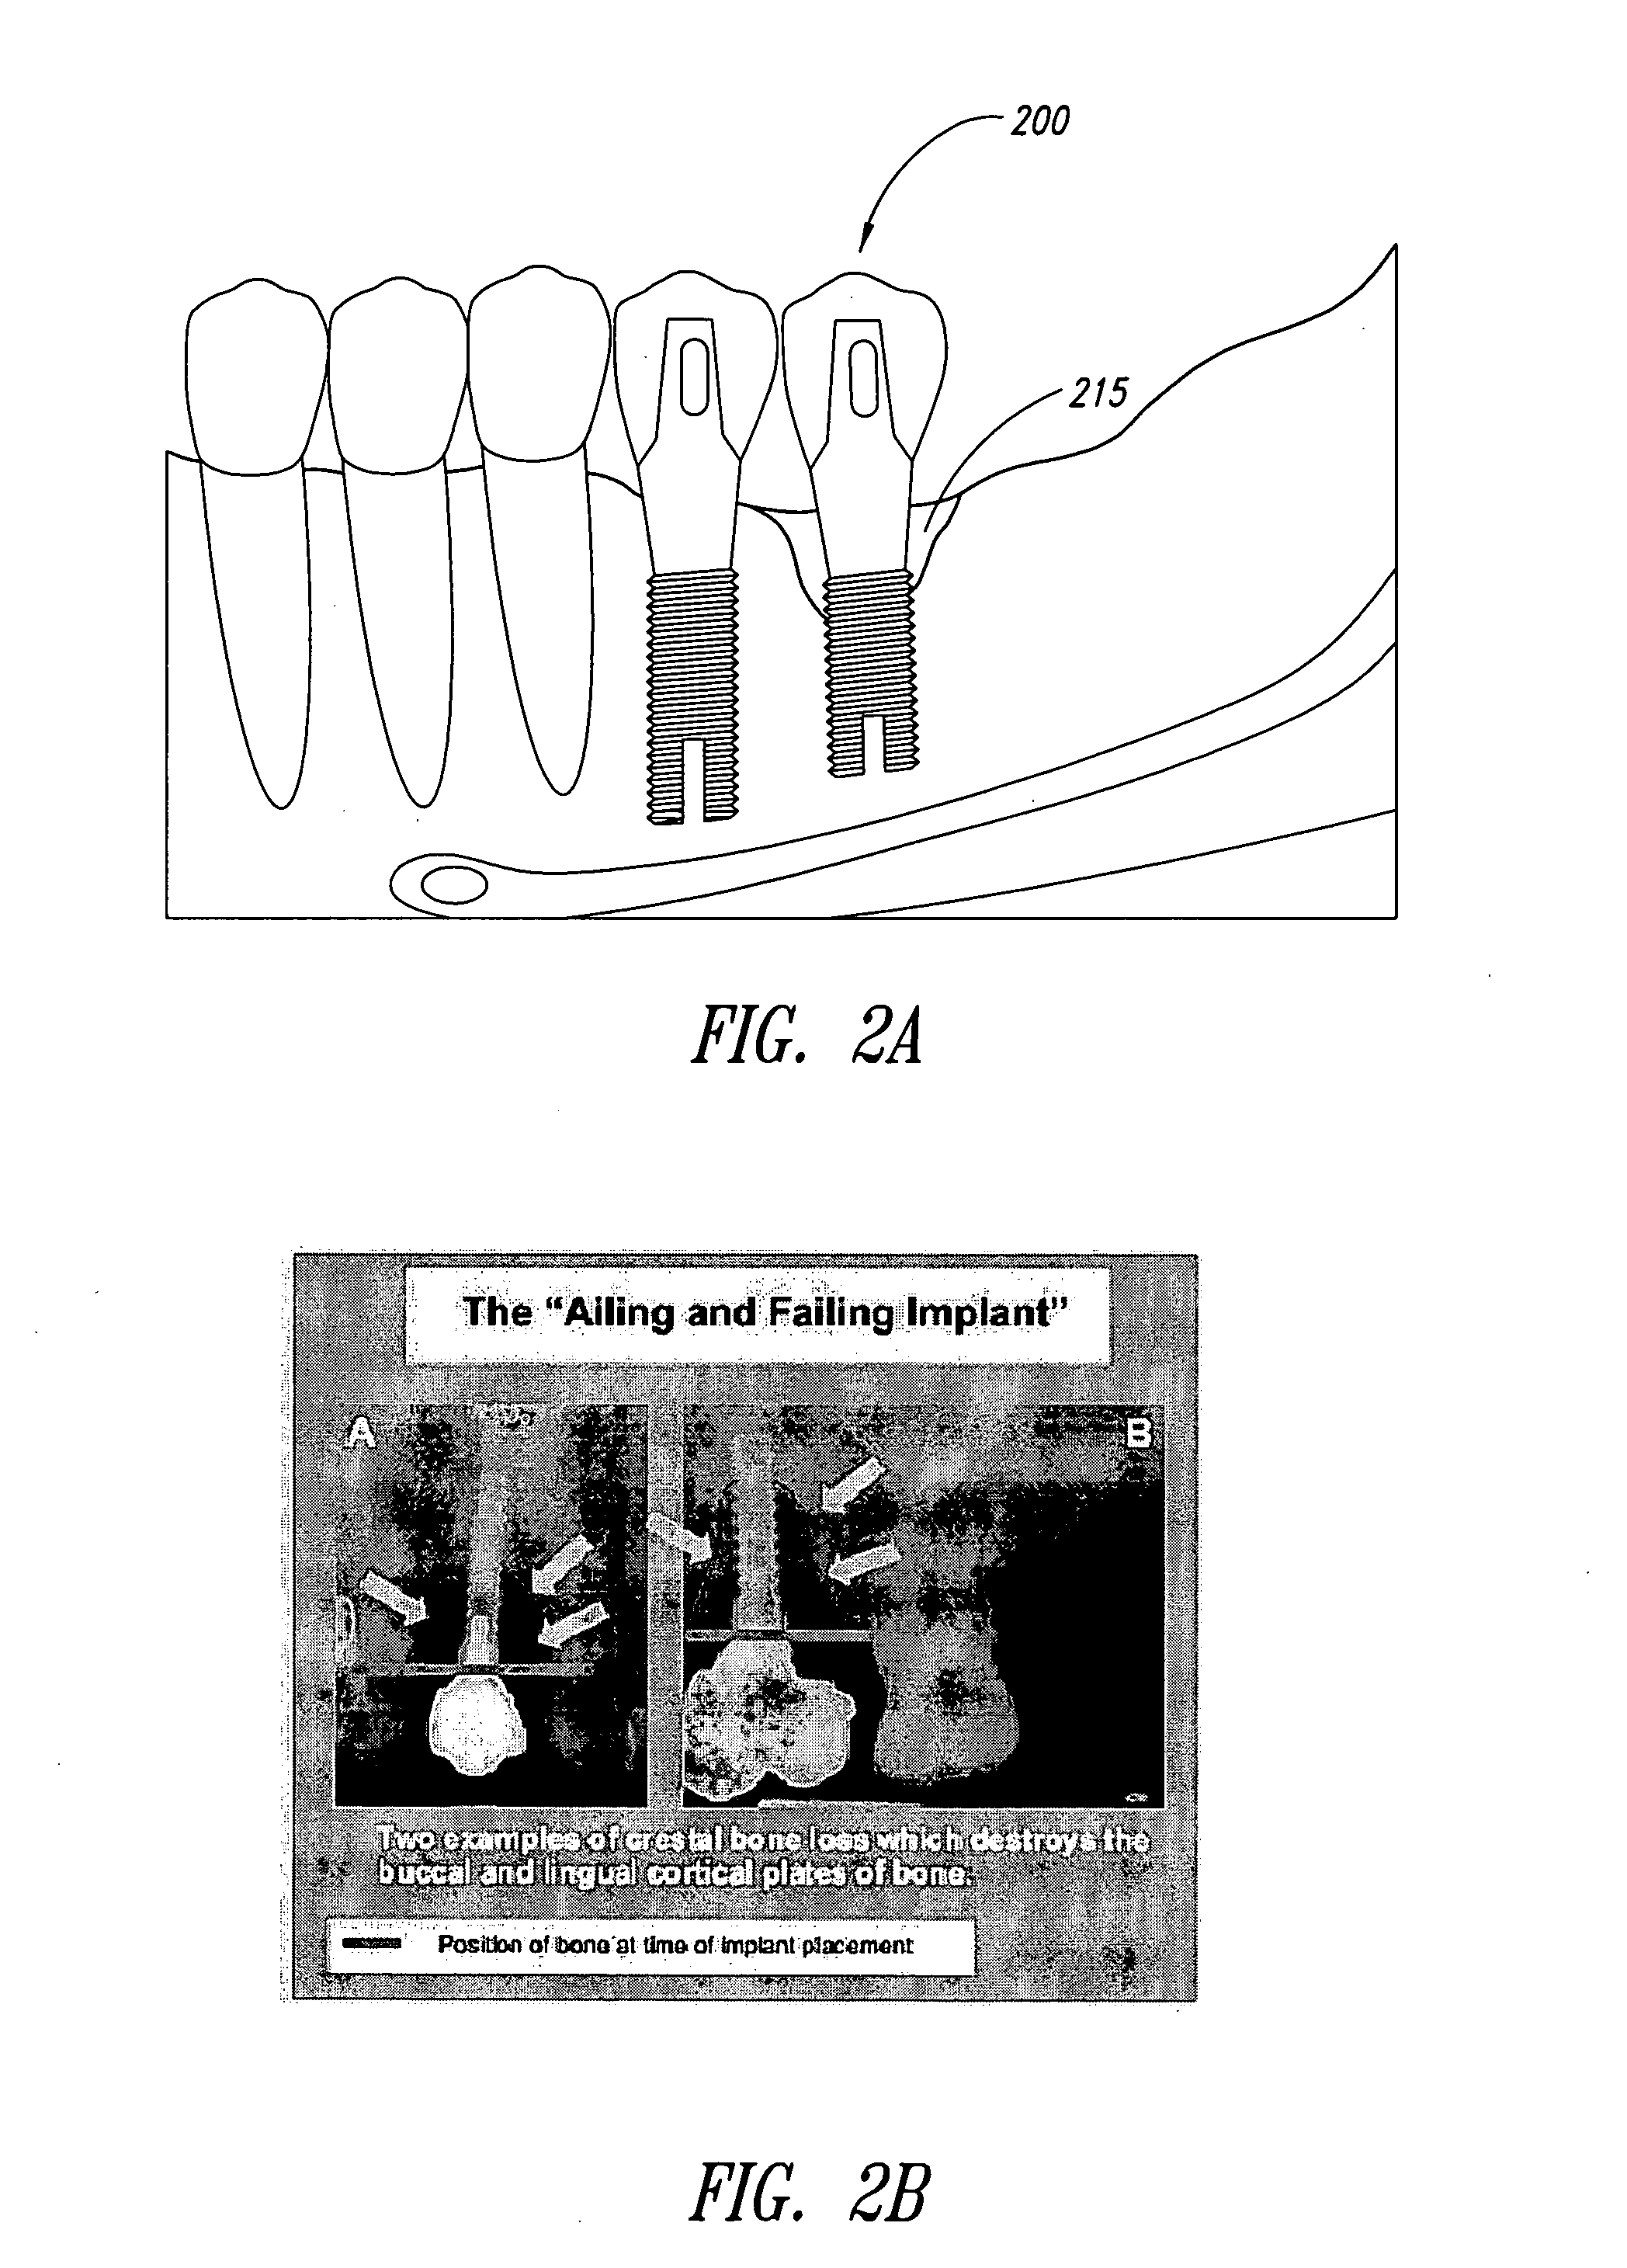 Method and system for repairing endosseous implants, such as with a bone graft implant